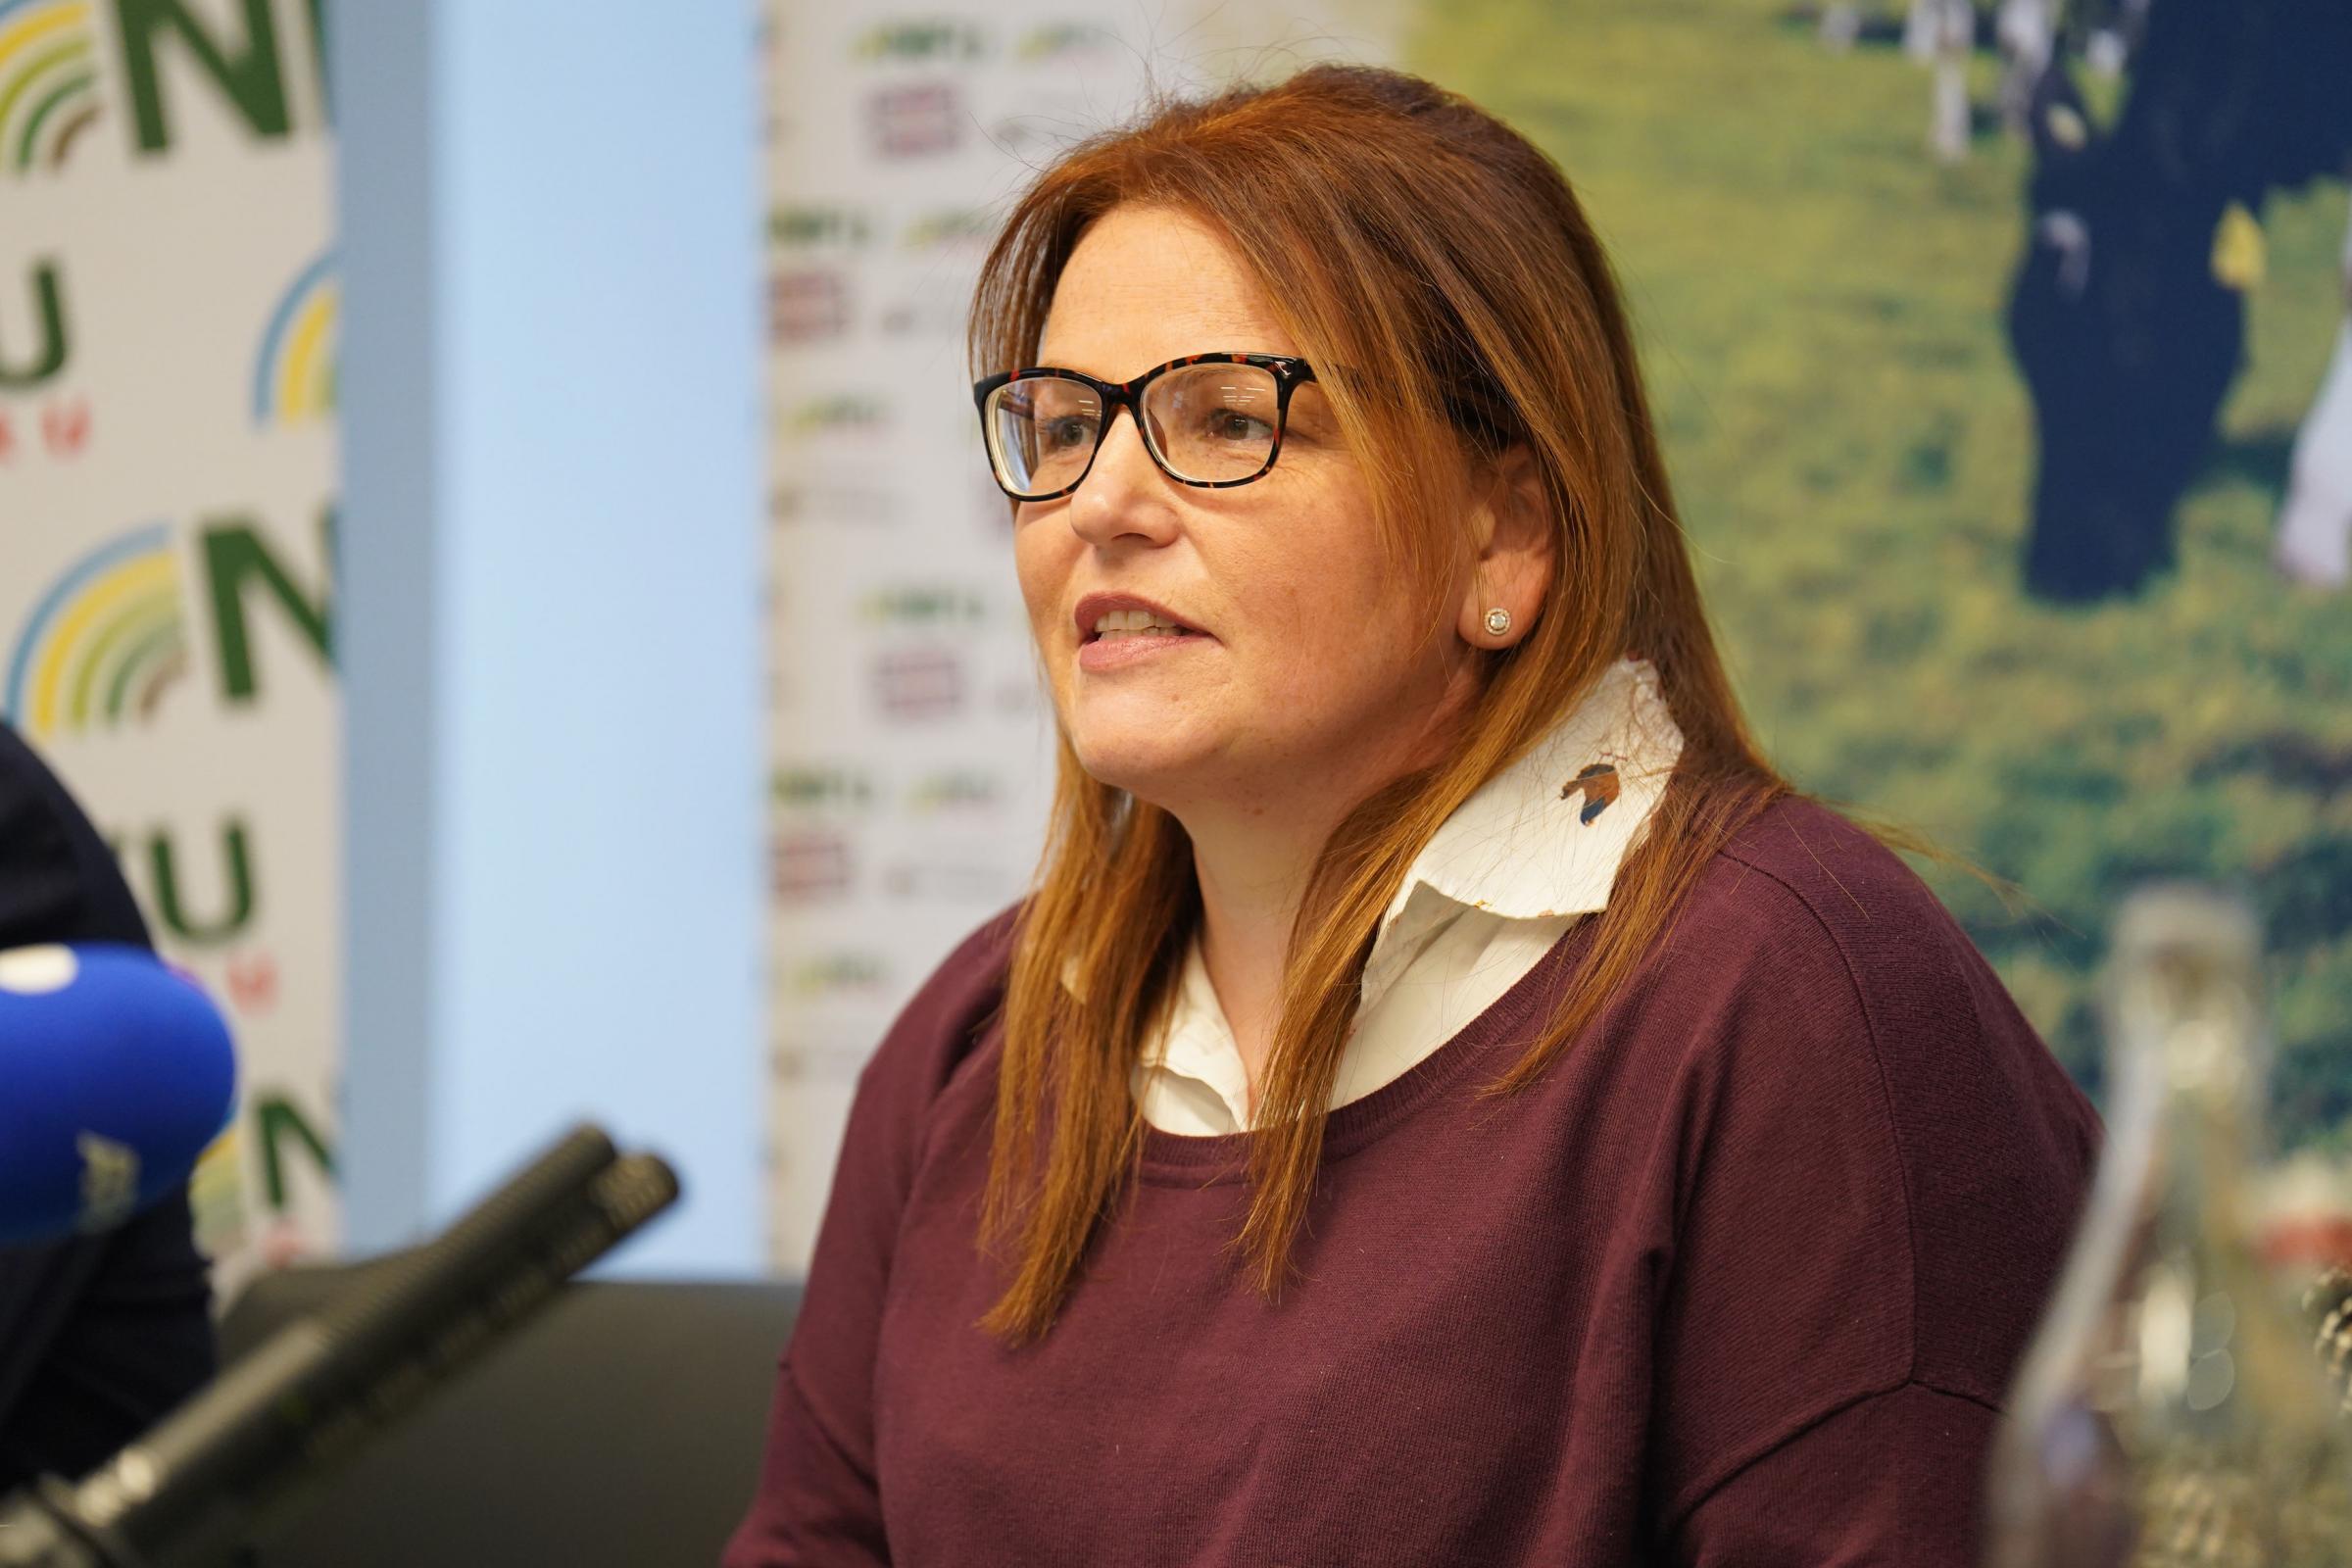 Victoria Sherrington-Jones, producer and owner of Country Fresh Eggs, speaking about the food supply chain issues impacting multiple farming sectors during a press conference at the National Farmers Union in London